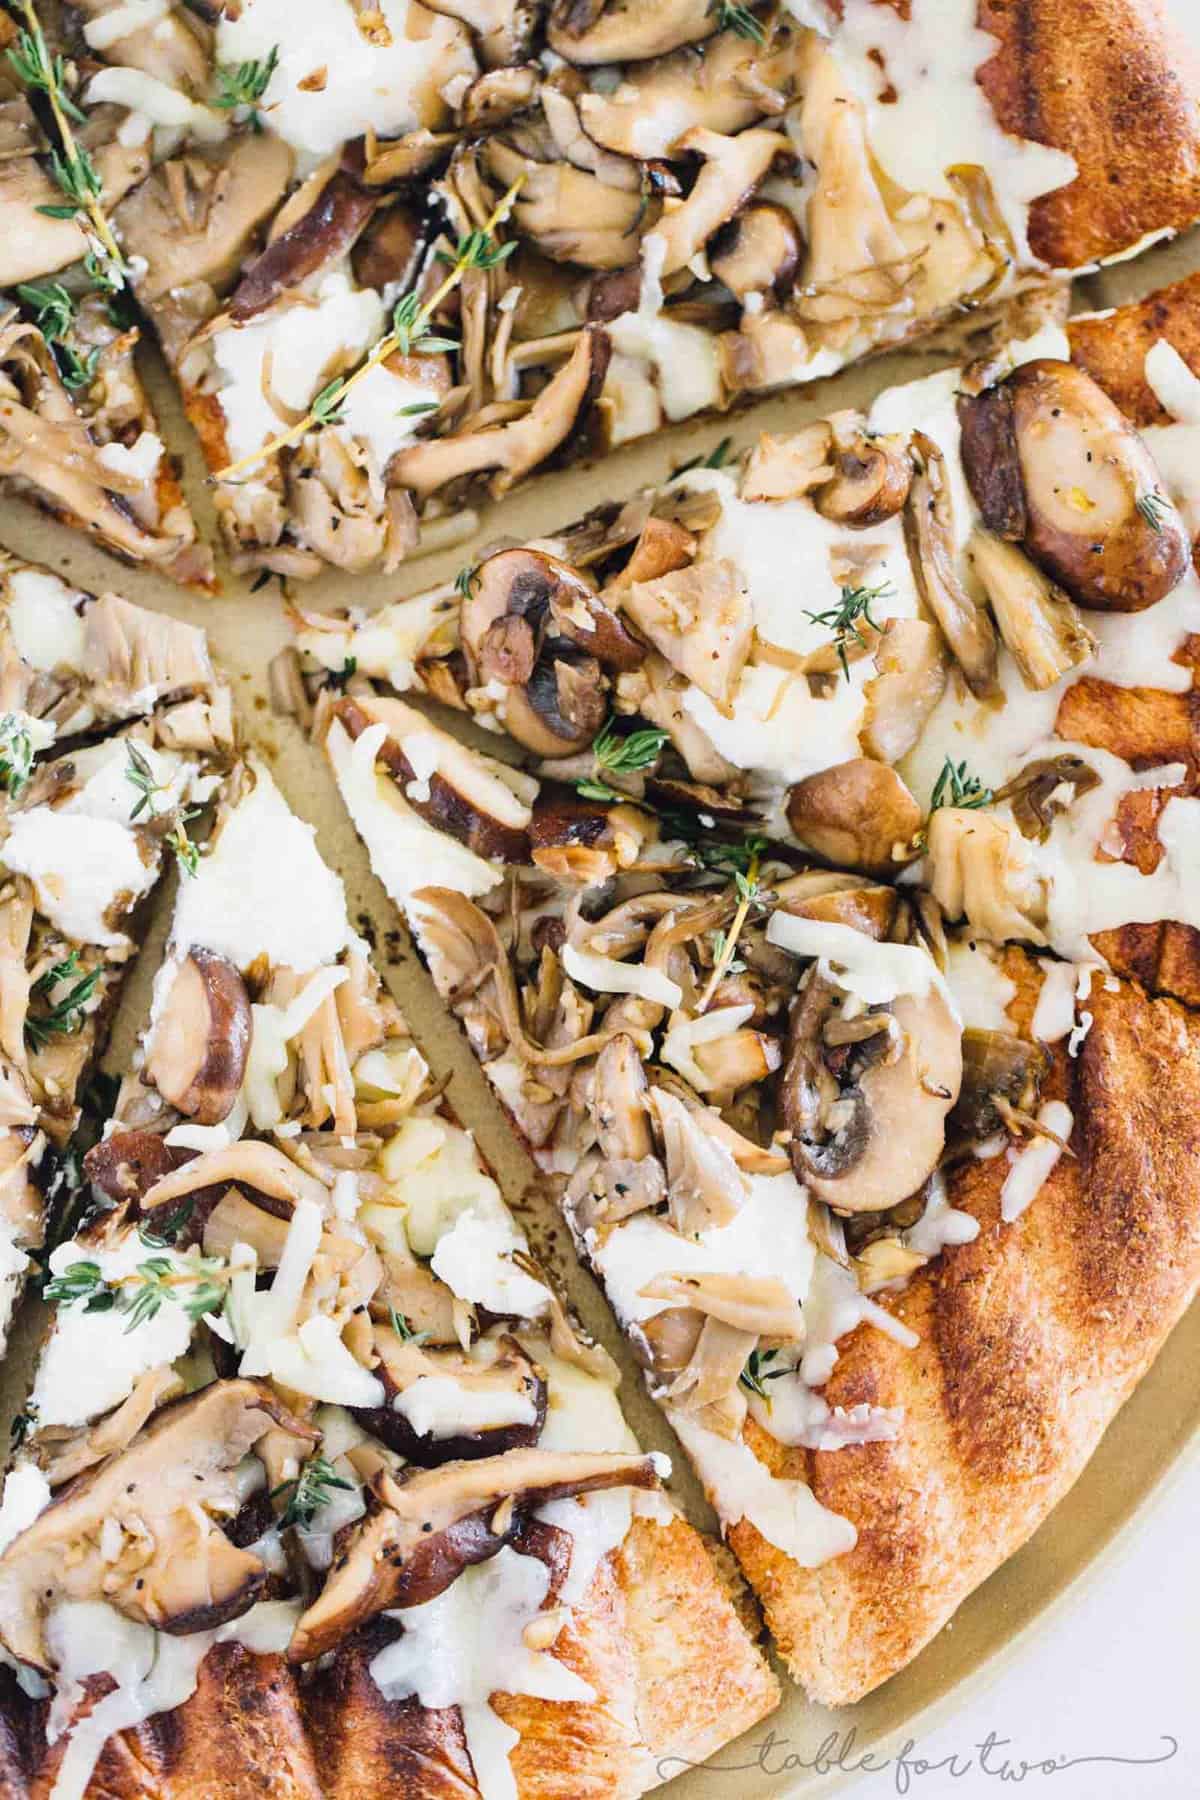 Mushroom lovers will be in paradise with this triple mushroom and herb grilled pizza! The earthy and hearty mushrooms on top of this pizza pair perfectly with the creamy ricotta and mozzarella cheese!